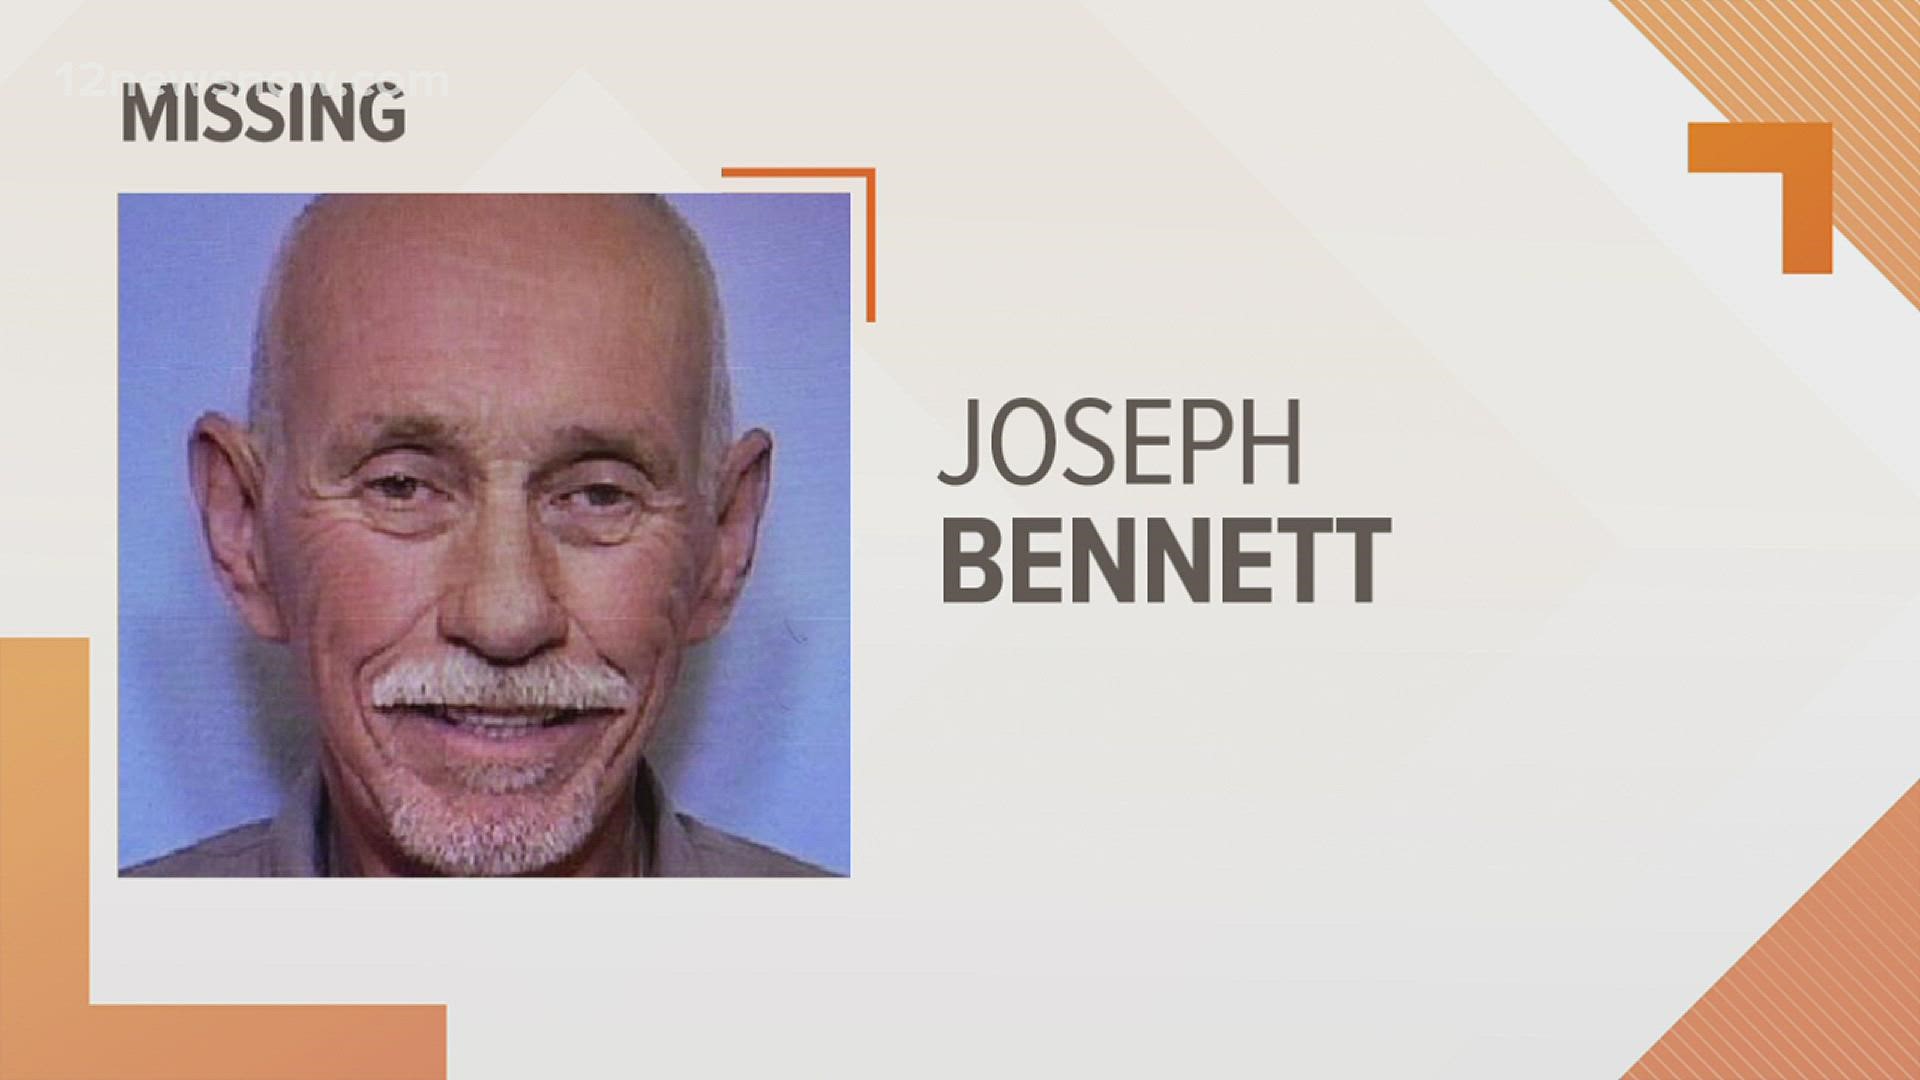 Joseph Bennett suffers from dementia. If you have seen him, you're asked to call the sheriff's office.